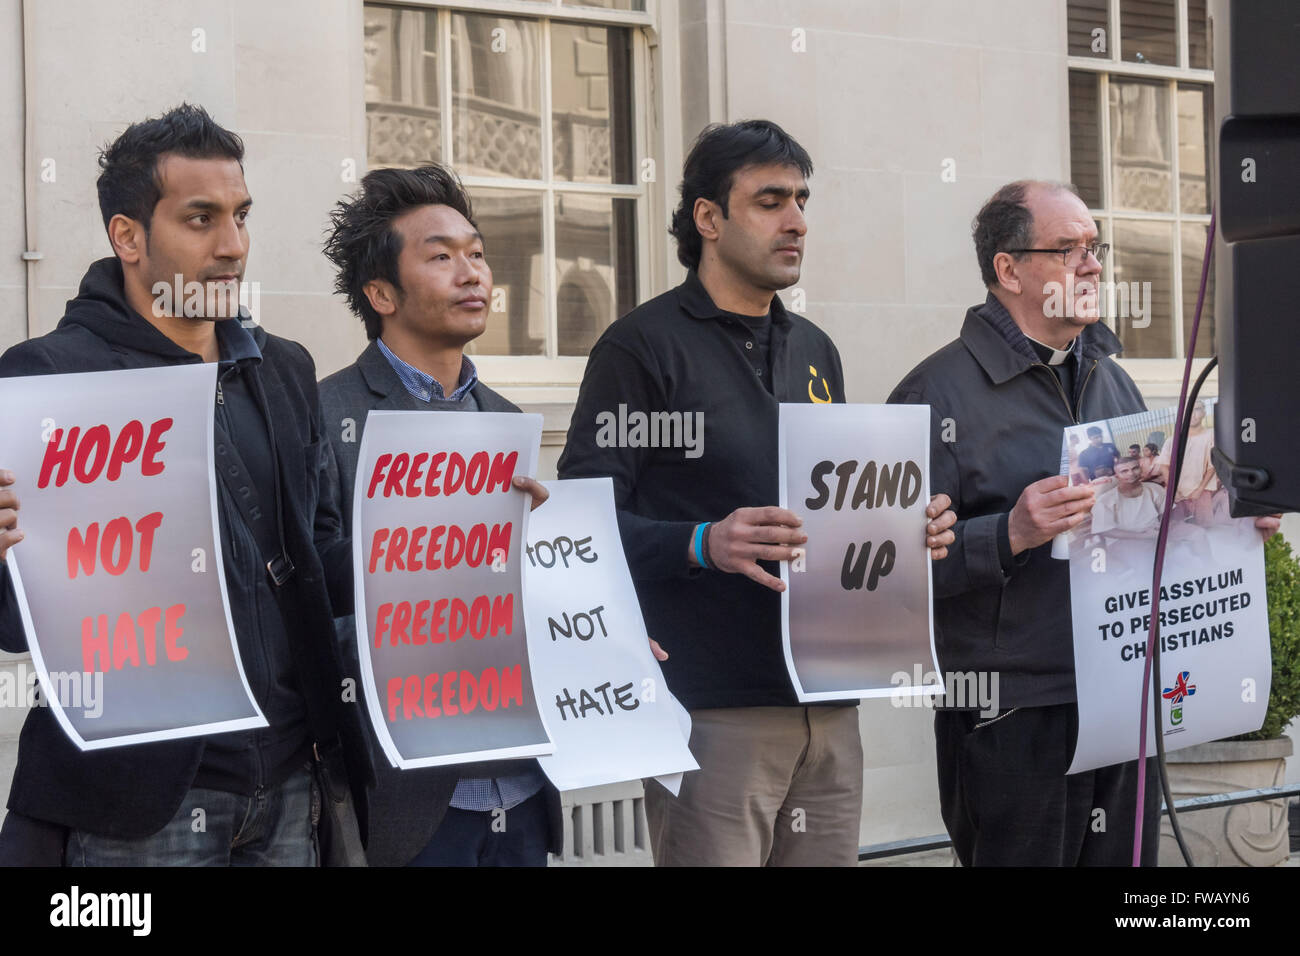 London, UK. 2th April, 2016.  Christian ministers hold posters at a rally following the Lahore bombing at the Pakistan High Commision. Pakistani, Nepalese and British Christians at the protest called for an end to the blasphemy laws and for the protection of all religious minorities in Pakistan.Peter Marshall/Alamy Live News Stock Photo